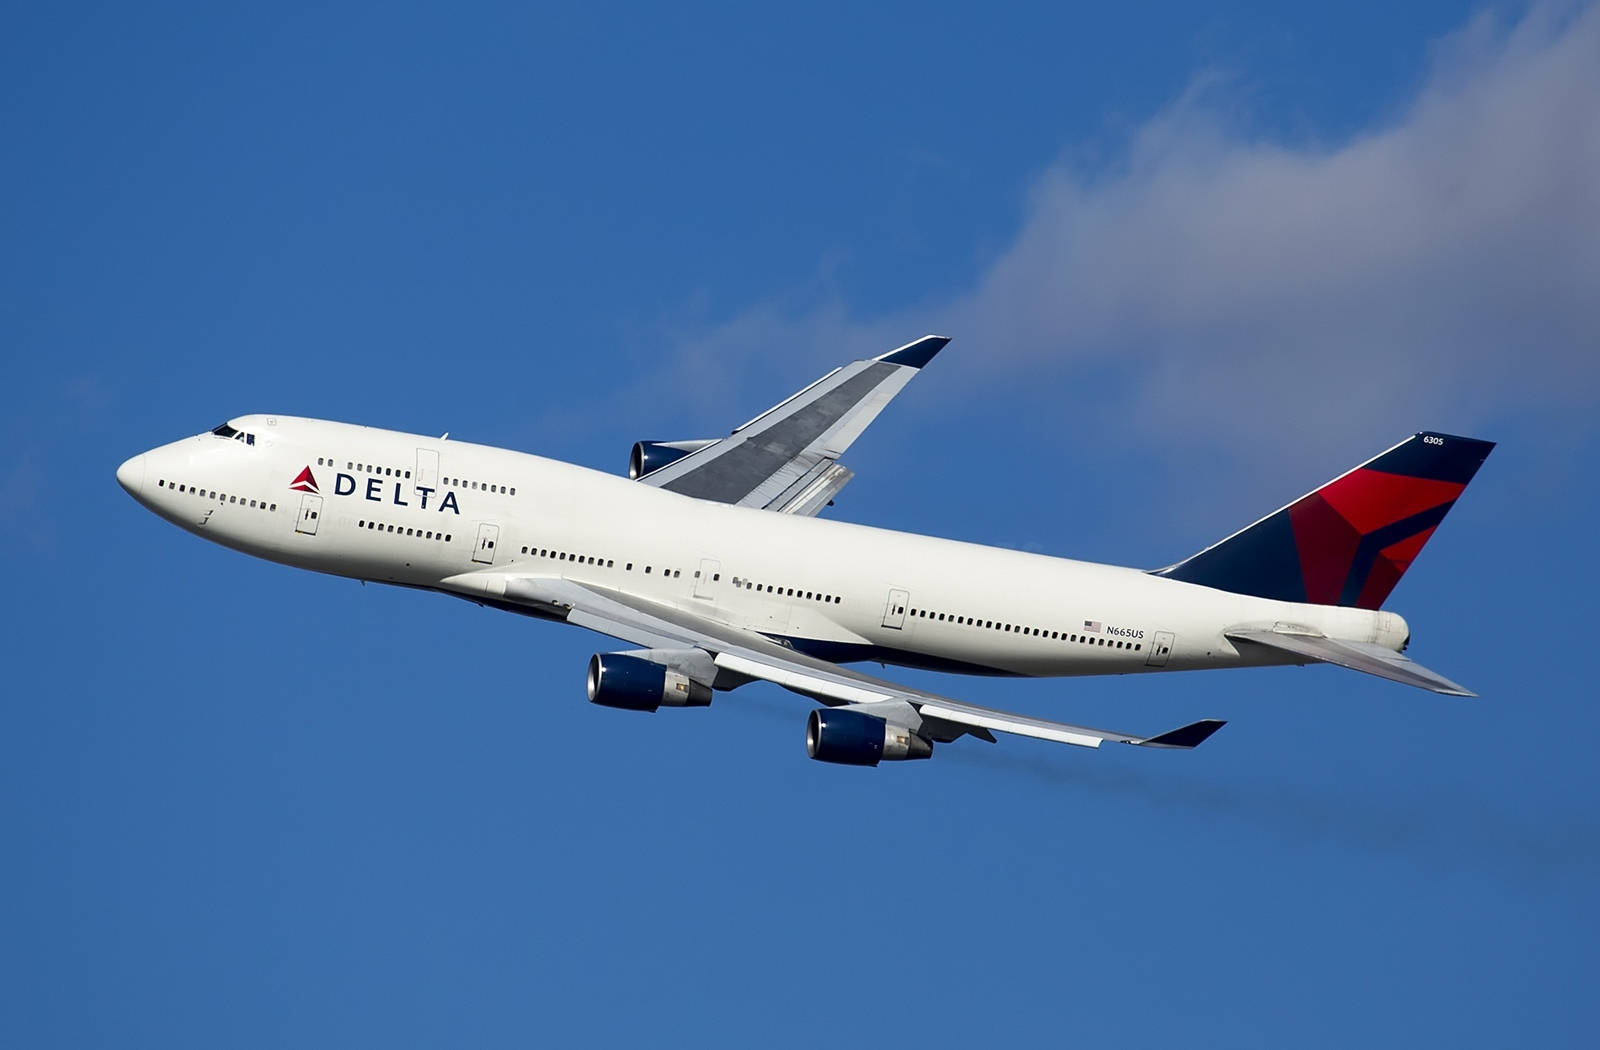 Delta Airlines Airplane Clear Blue Sky Wallpaper